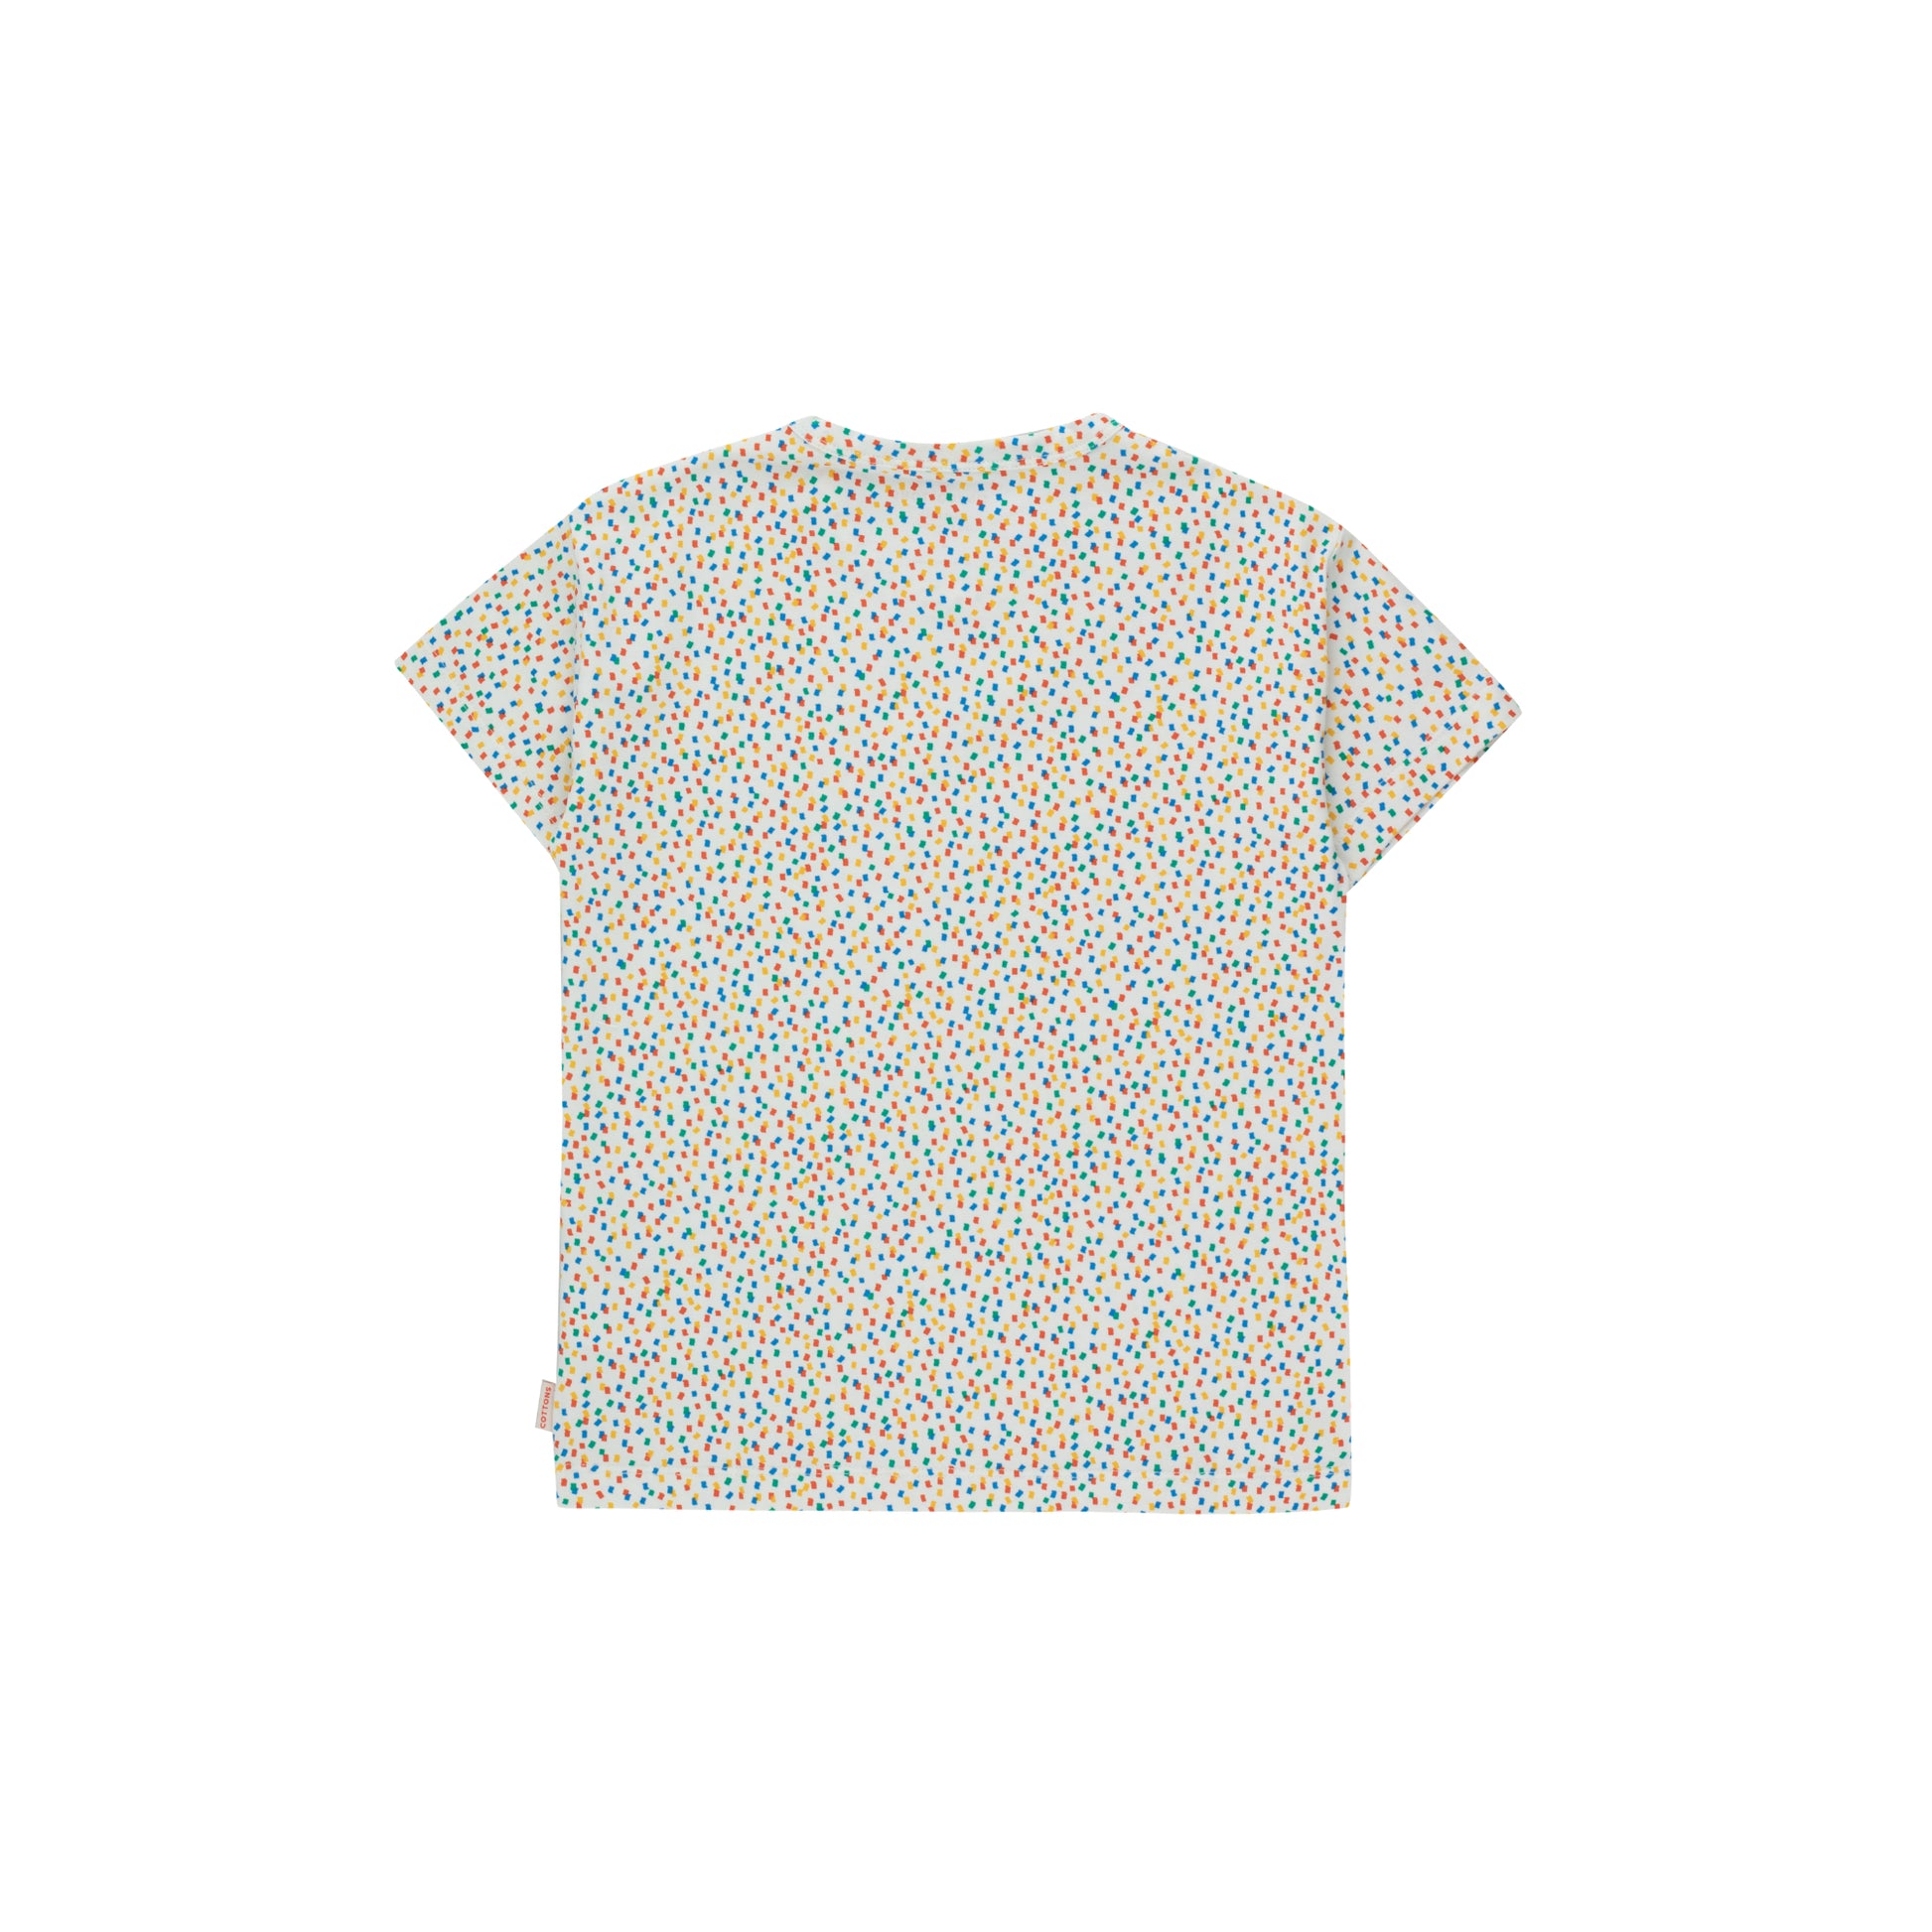 TINYCOTTONS Confetti Tee ALWAYS SHOW